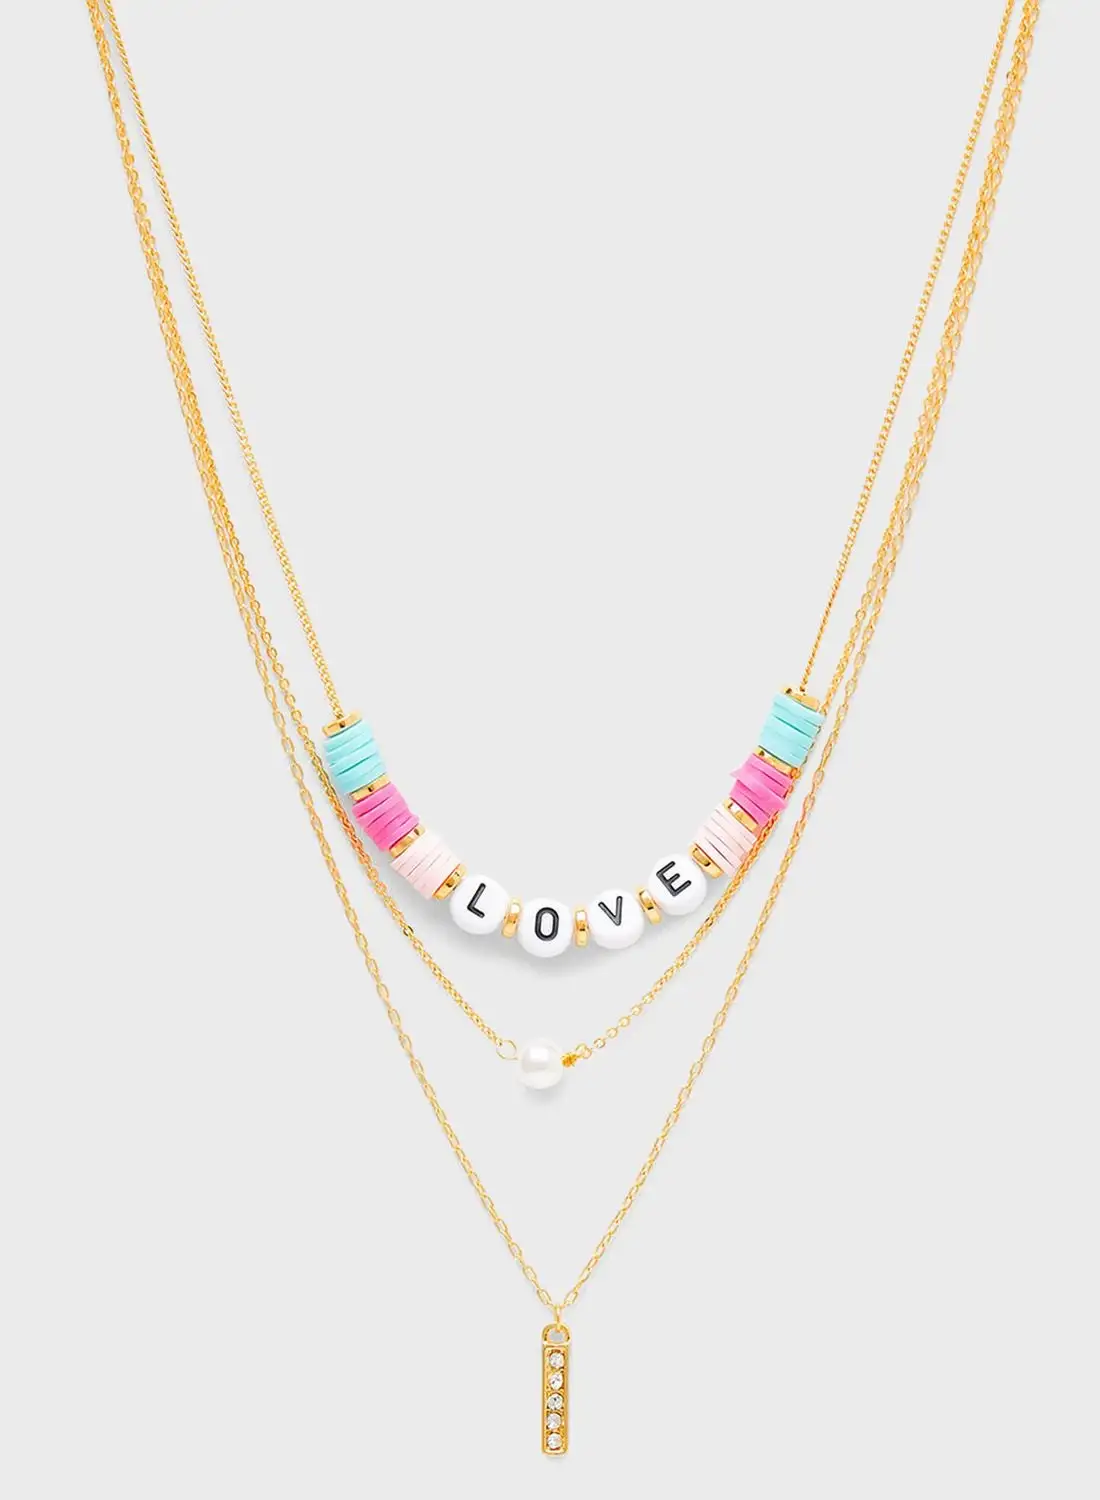 CALL IT SPRING Love Layered Necklace